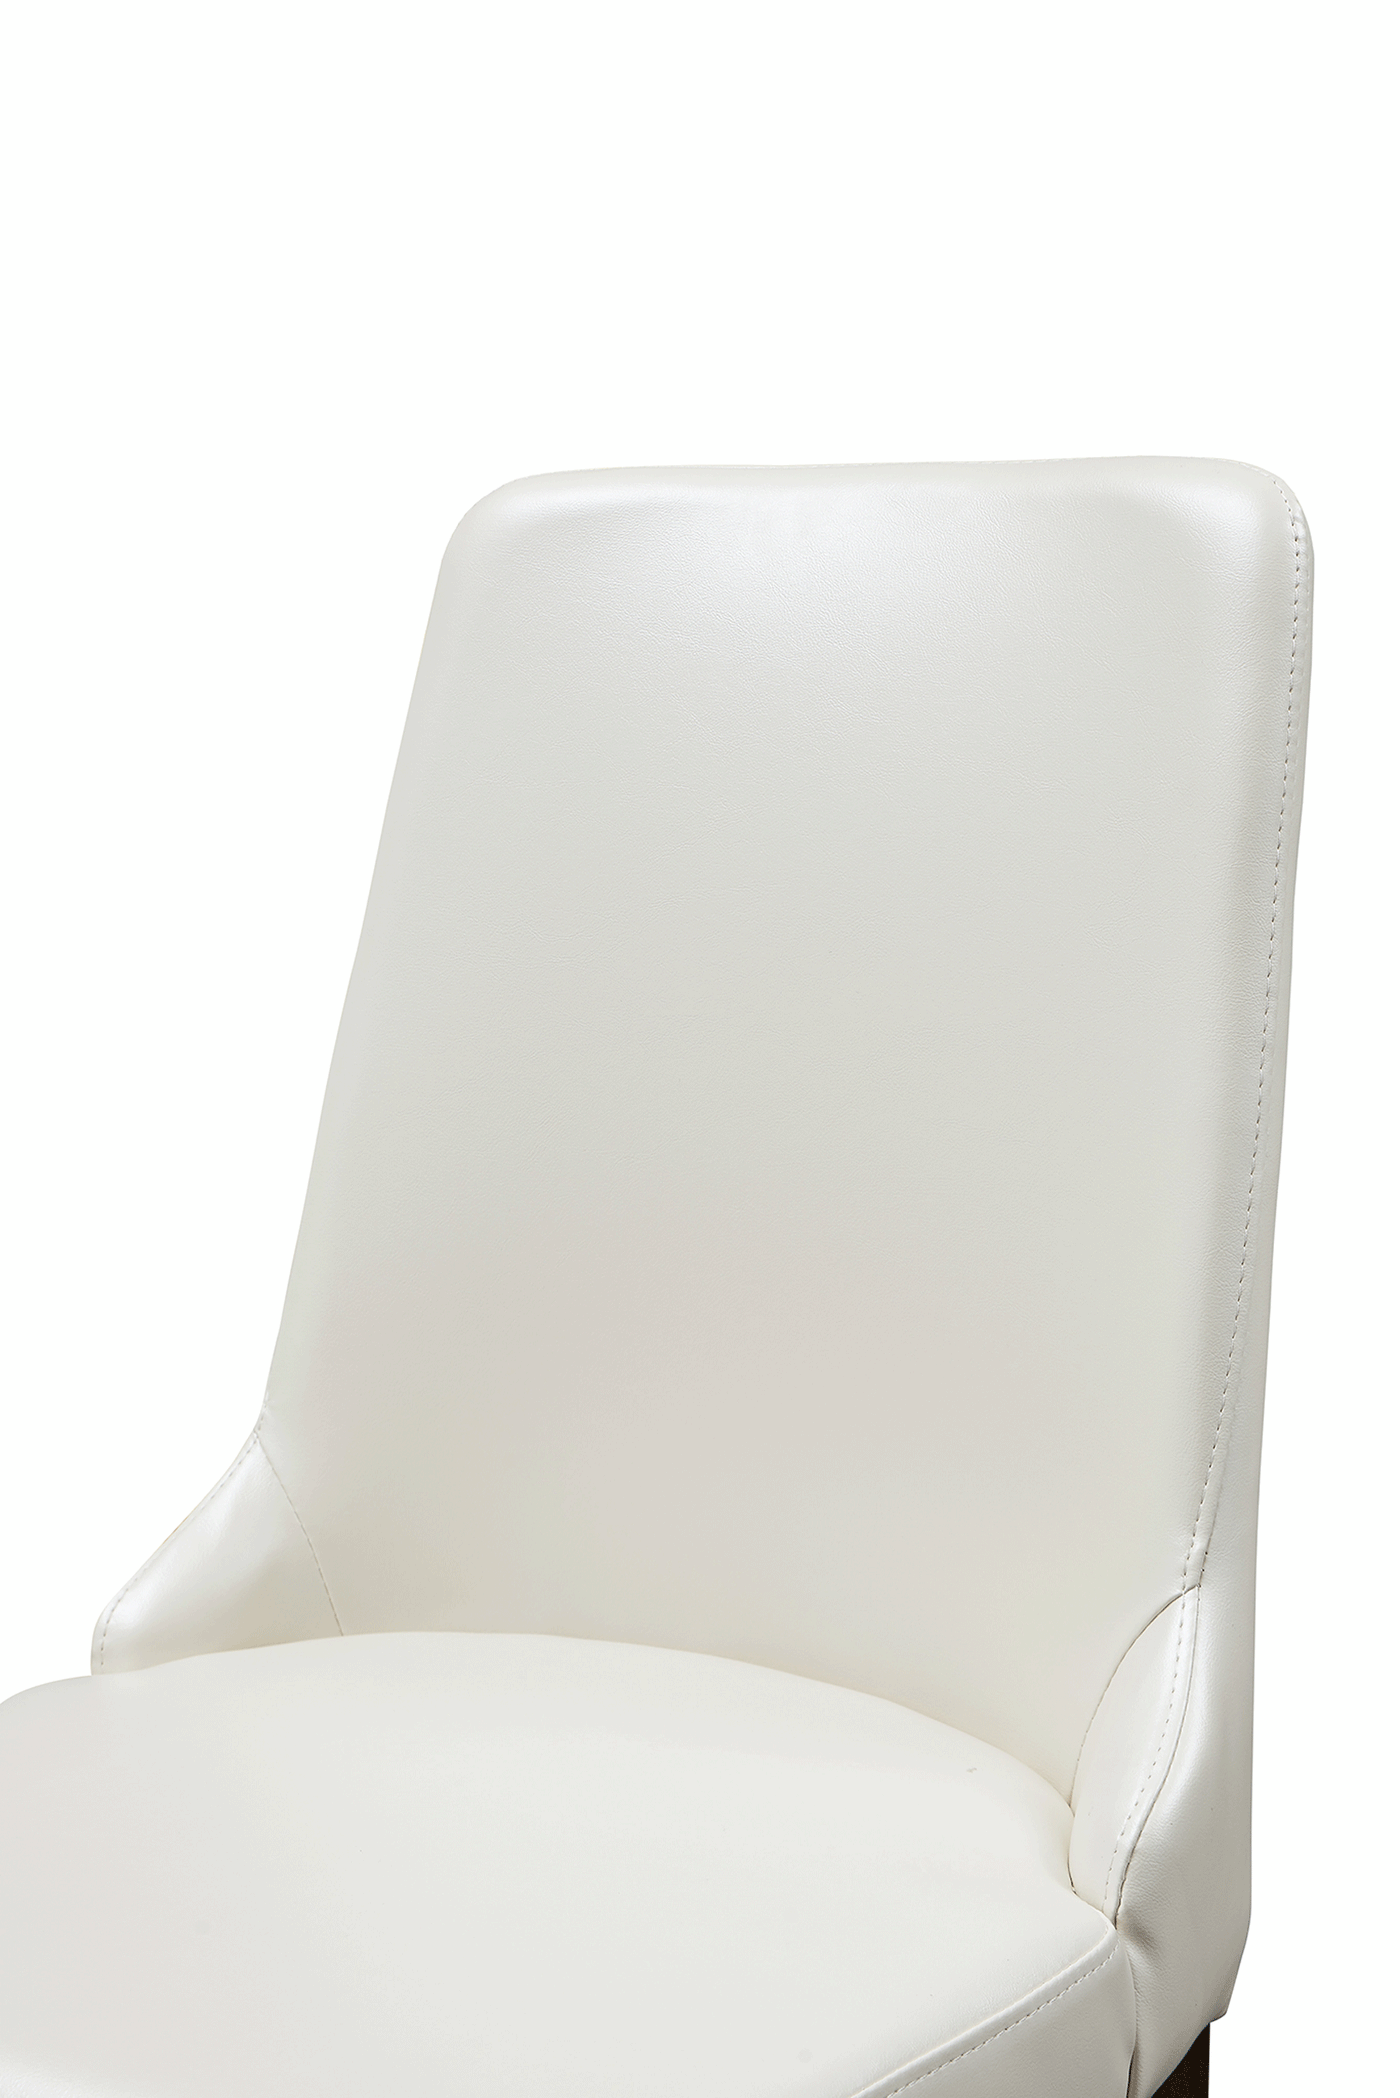 Afua Dining Chair